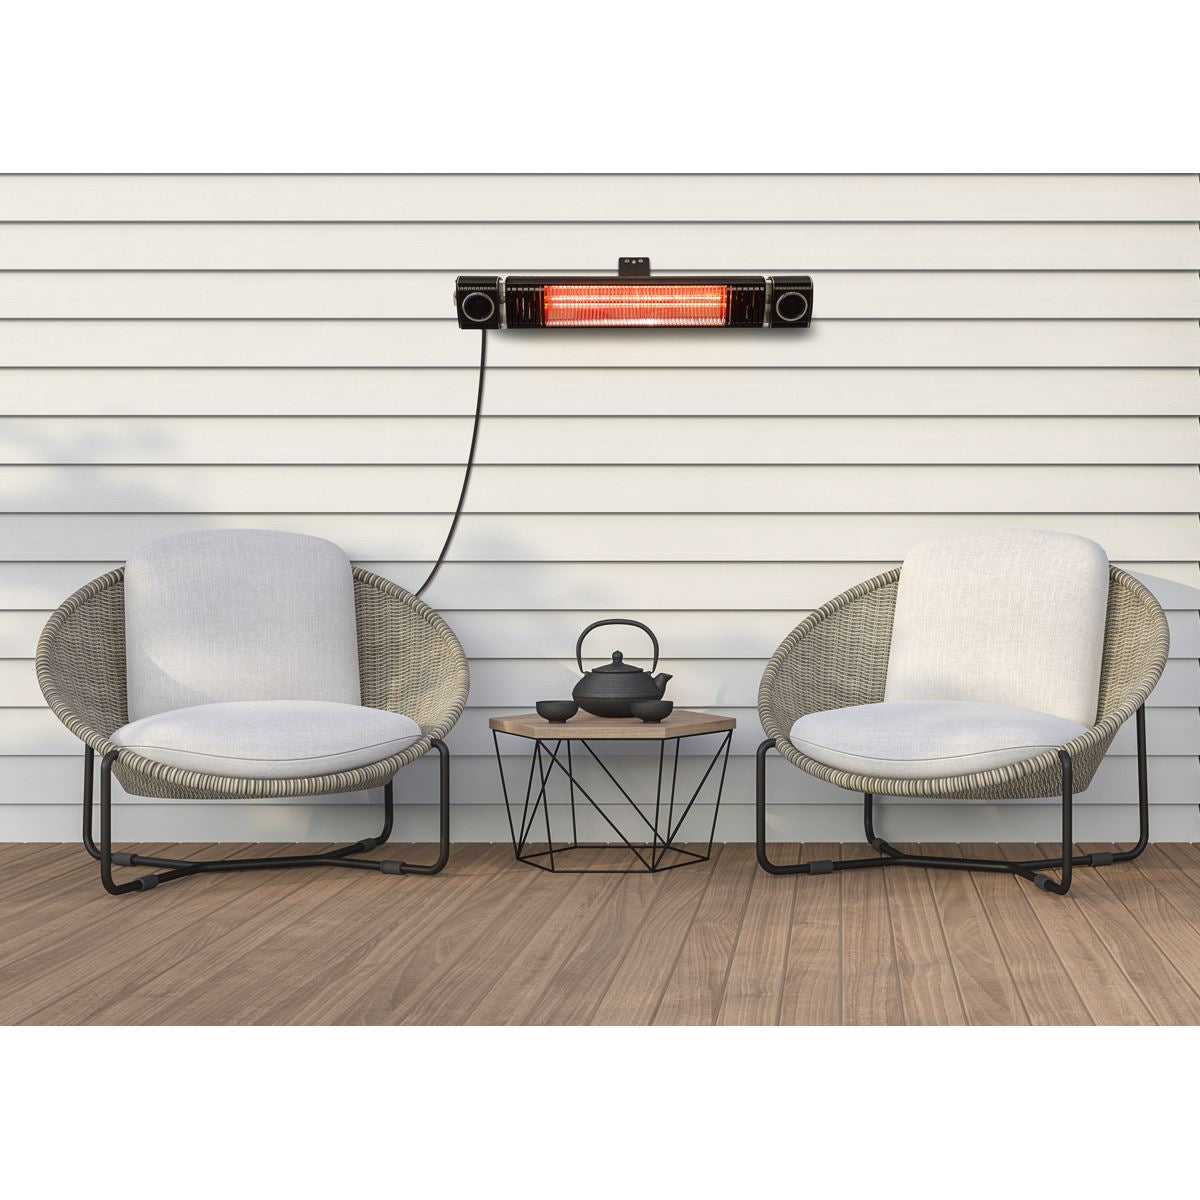 Dellonda Infrared Outdoor 2000W Patio Heater with Speakers for Music, Black